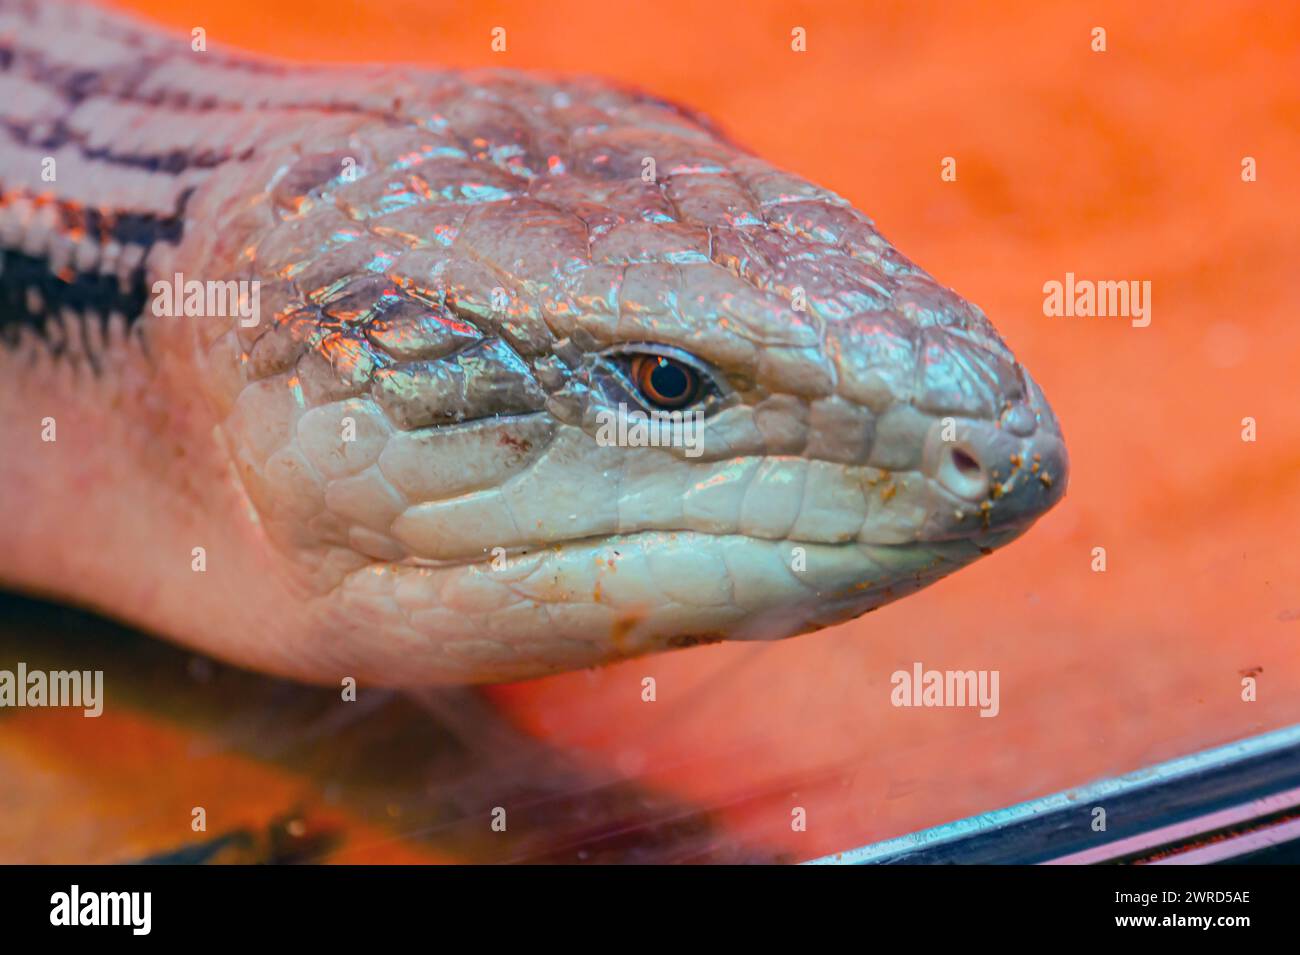 Skink lizard family Scincidae. Head close-up. Skinks are popular lizards for keeping in a home terrarium with an unusual long blue tongue. Blue-tongue Stock Photo